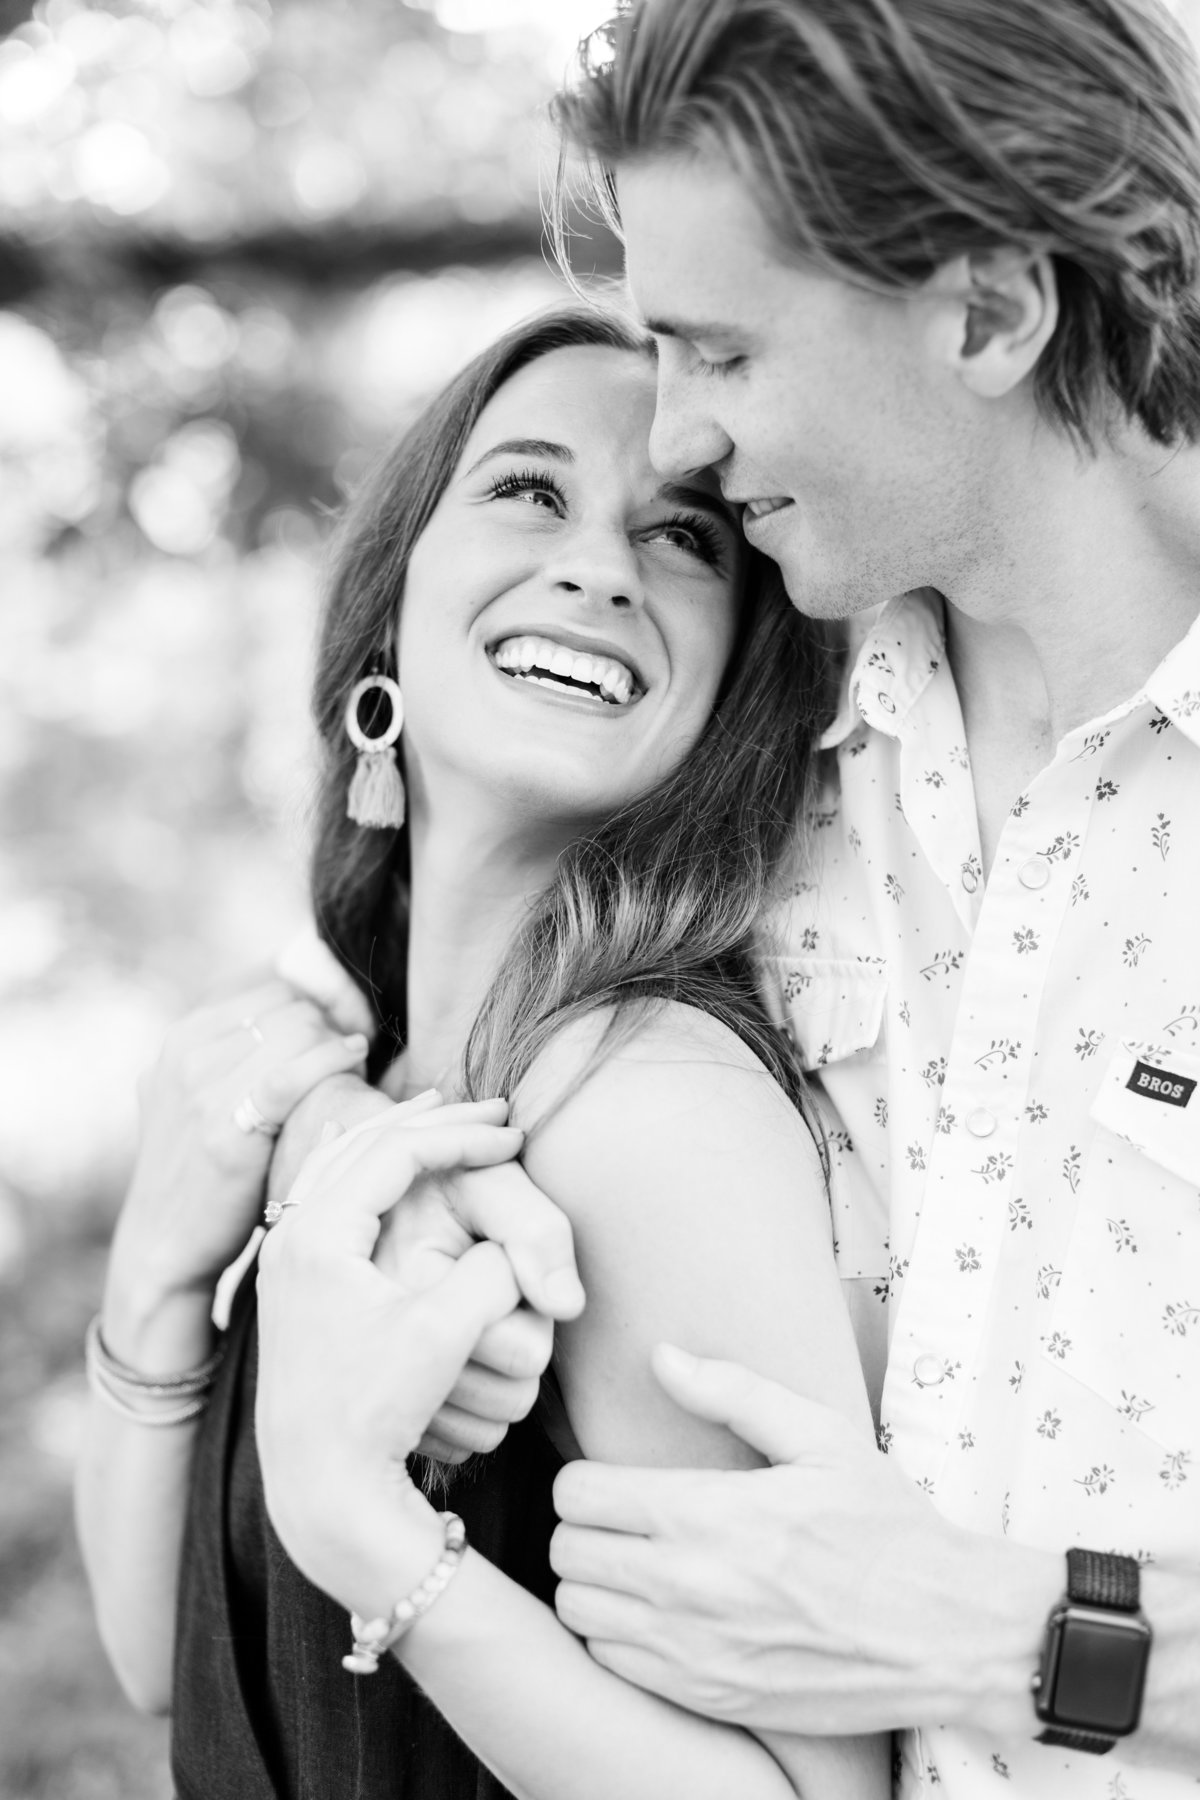 Black and white engagement photo of couple embracing